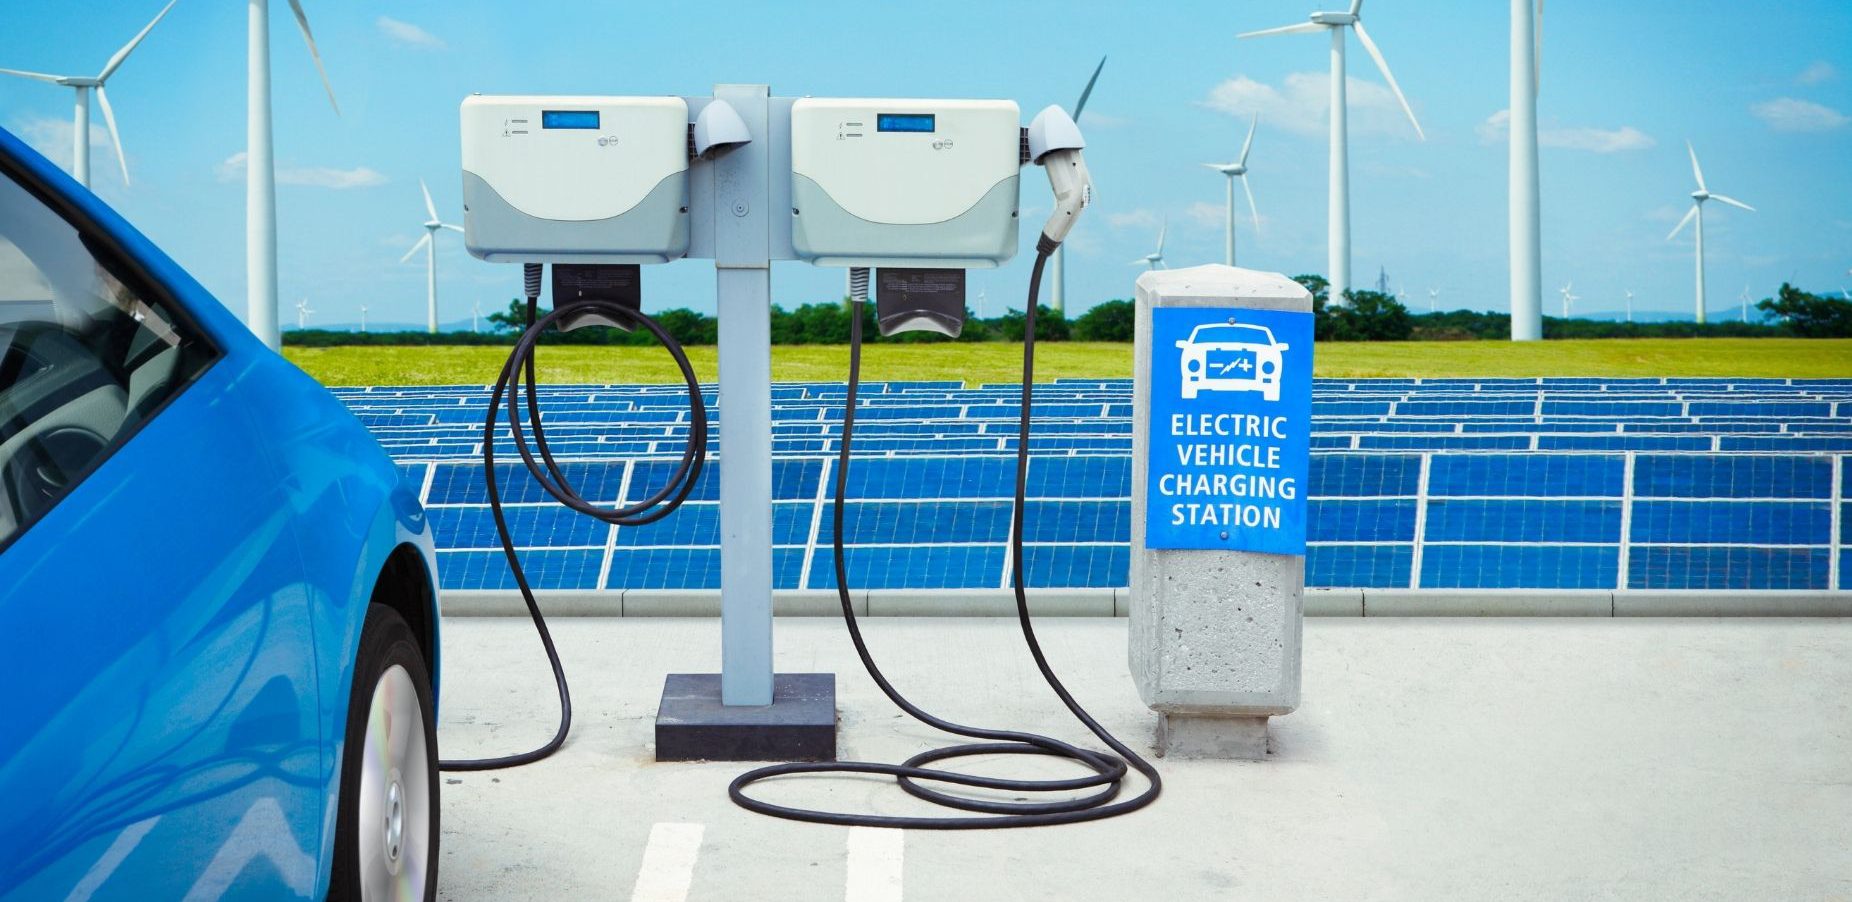 Global Electric Vehicle Charging Stations Market Outlook, Opportunities And Strategies